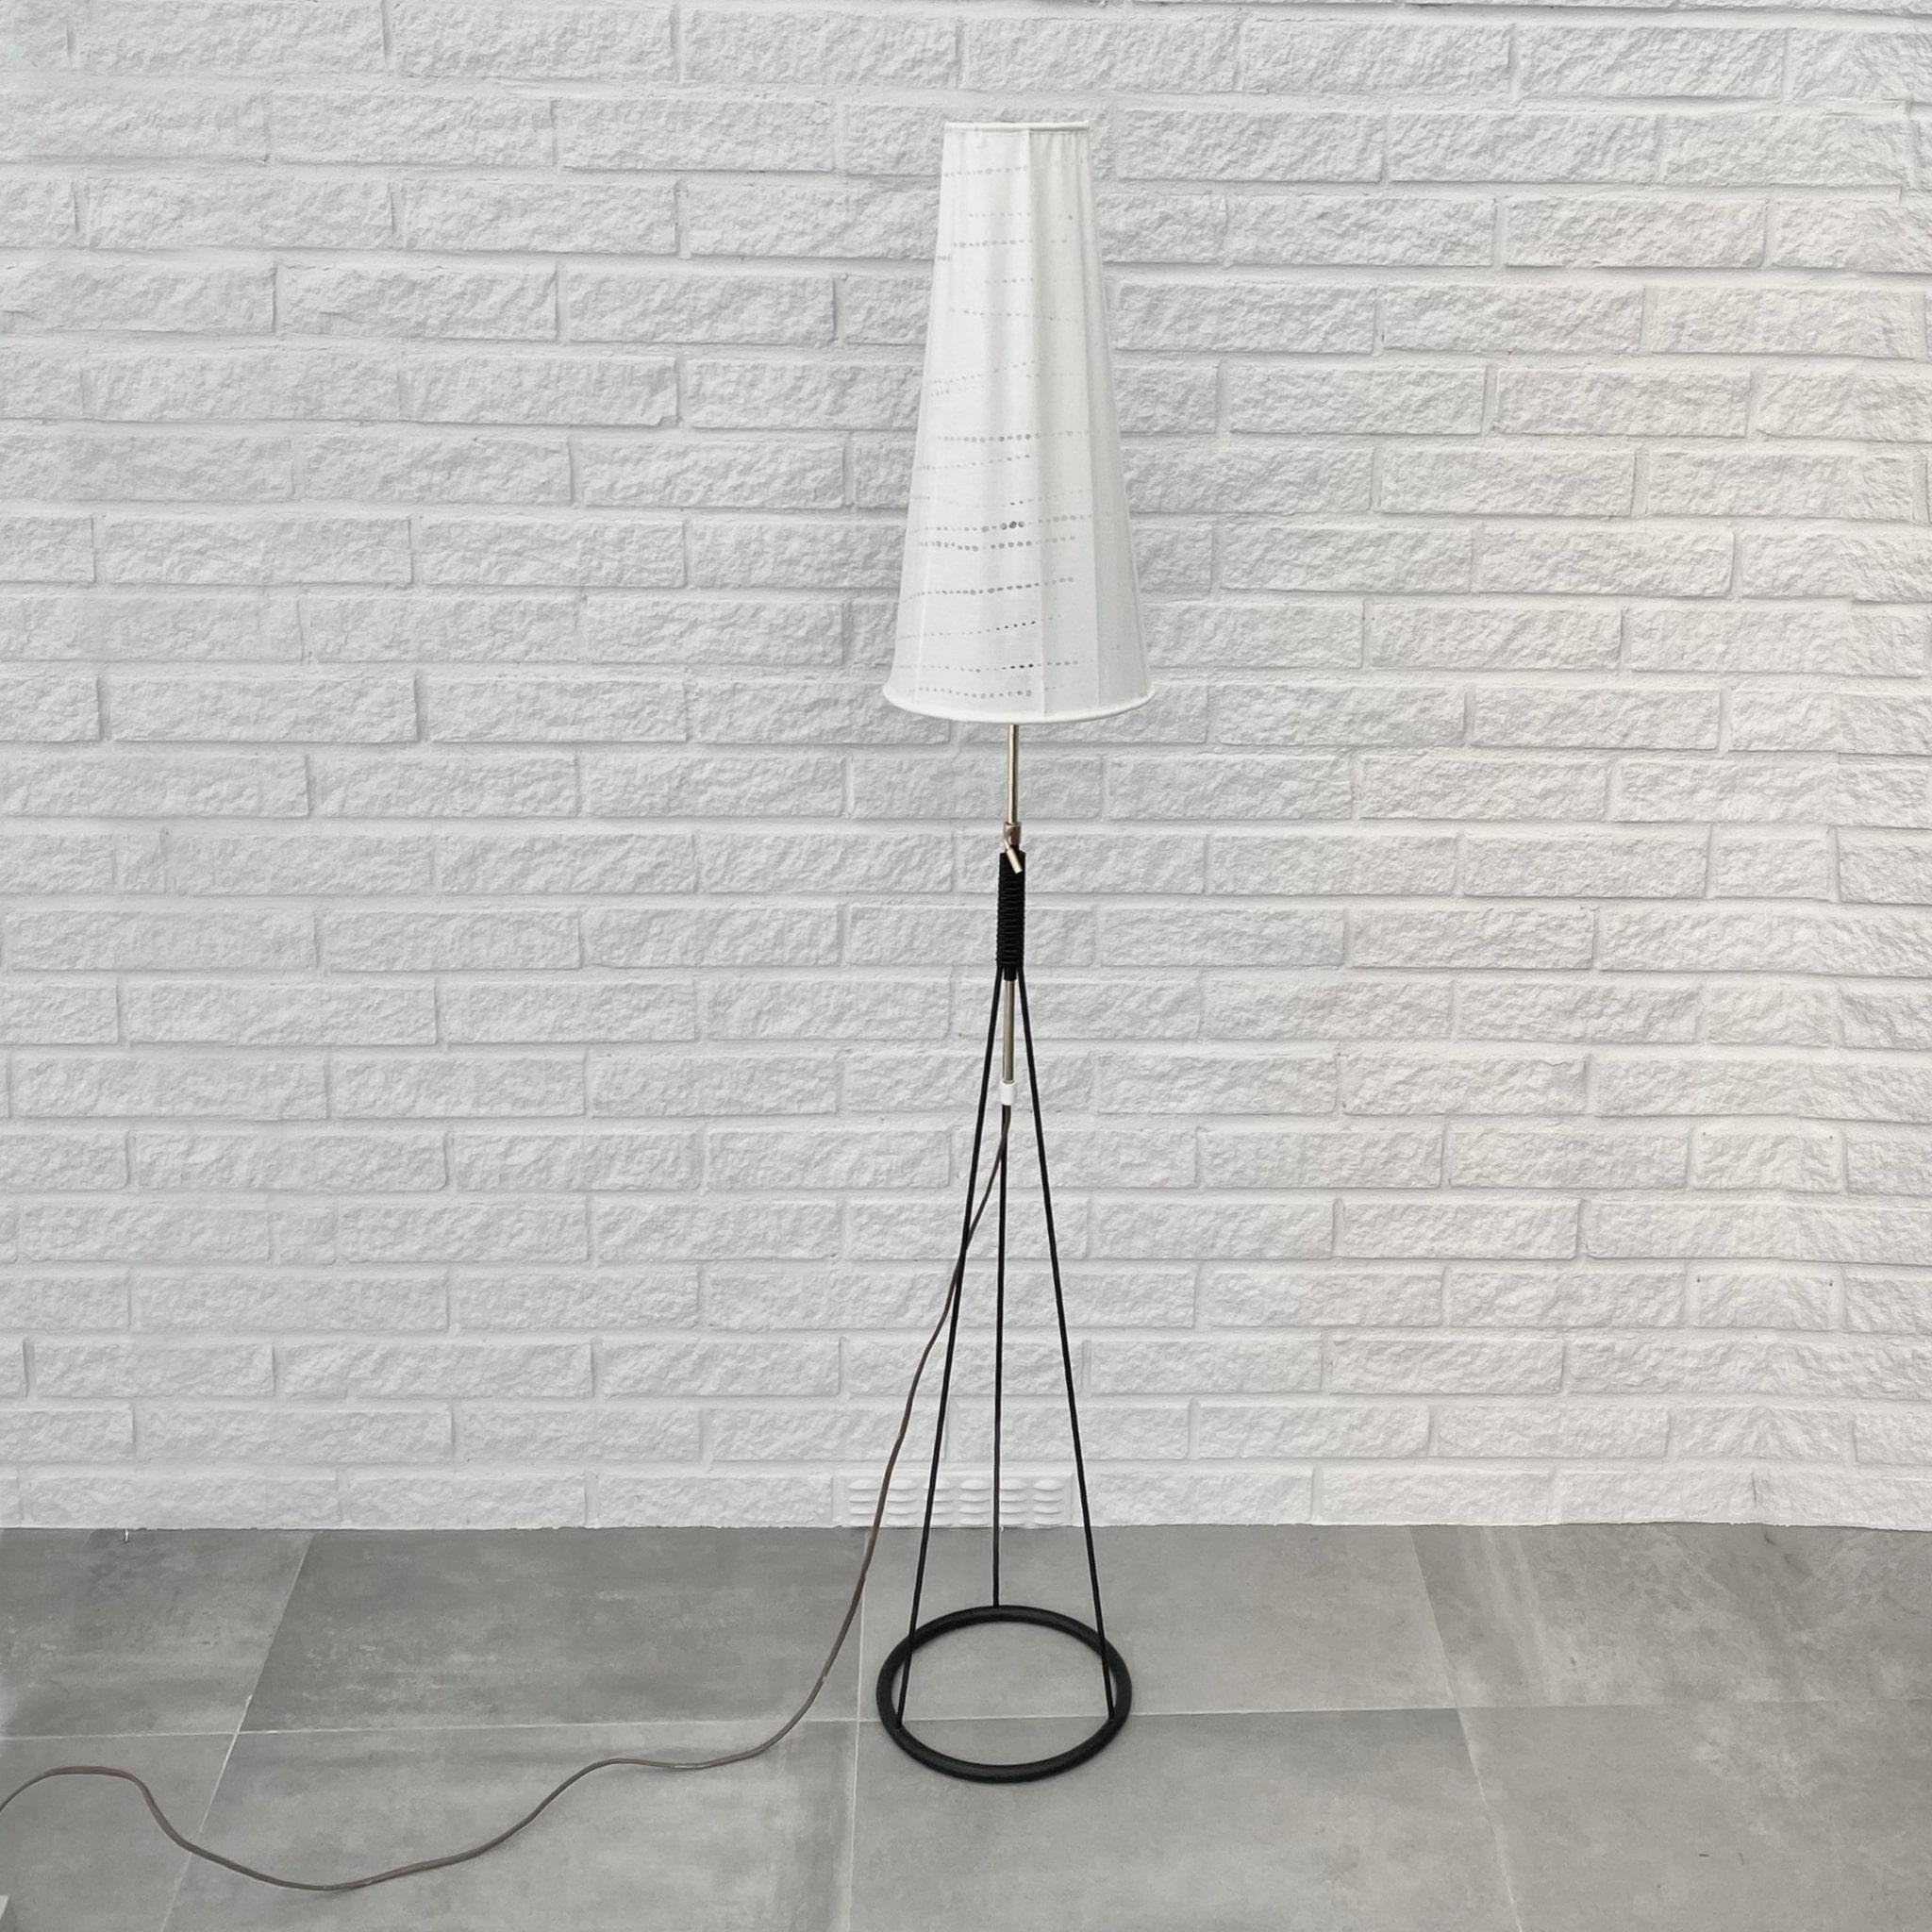 Swedish mid-century floor lamp, model 2619, designed by Eje Ahlgren for LUCO Armaturfabrik in Gothenburg in the 1950s. This iconic piece was Ahlgren’s breakthrough as a lighting designer. The base is crafted from three slender metal rods supported